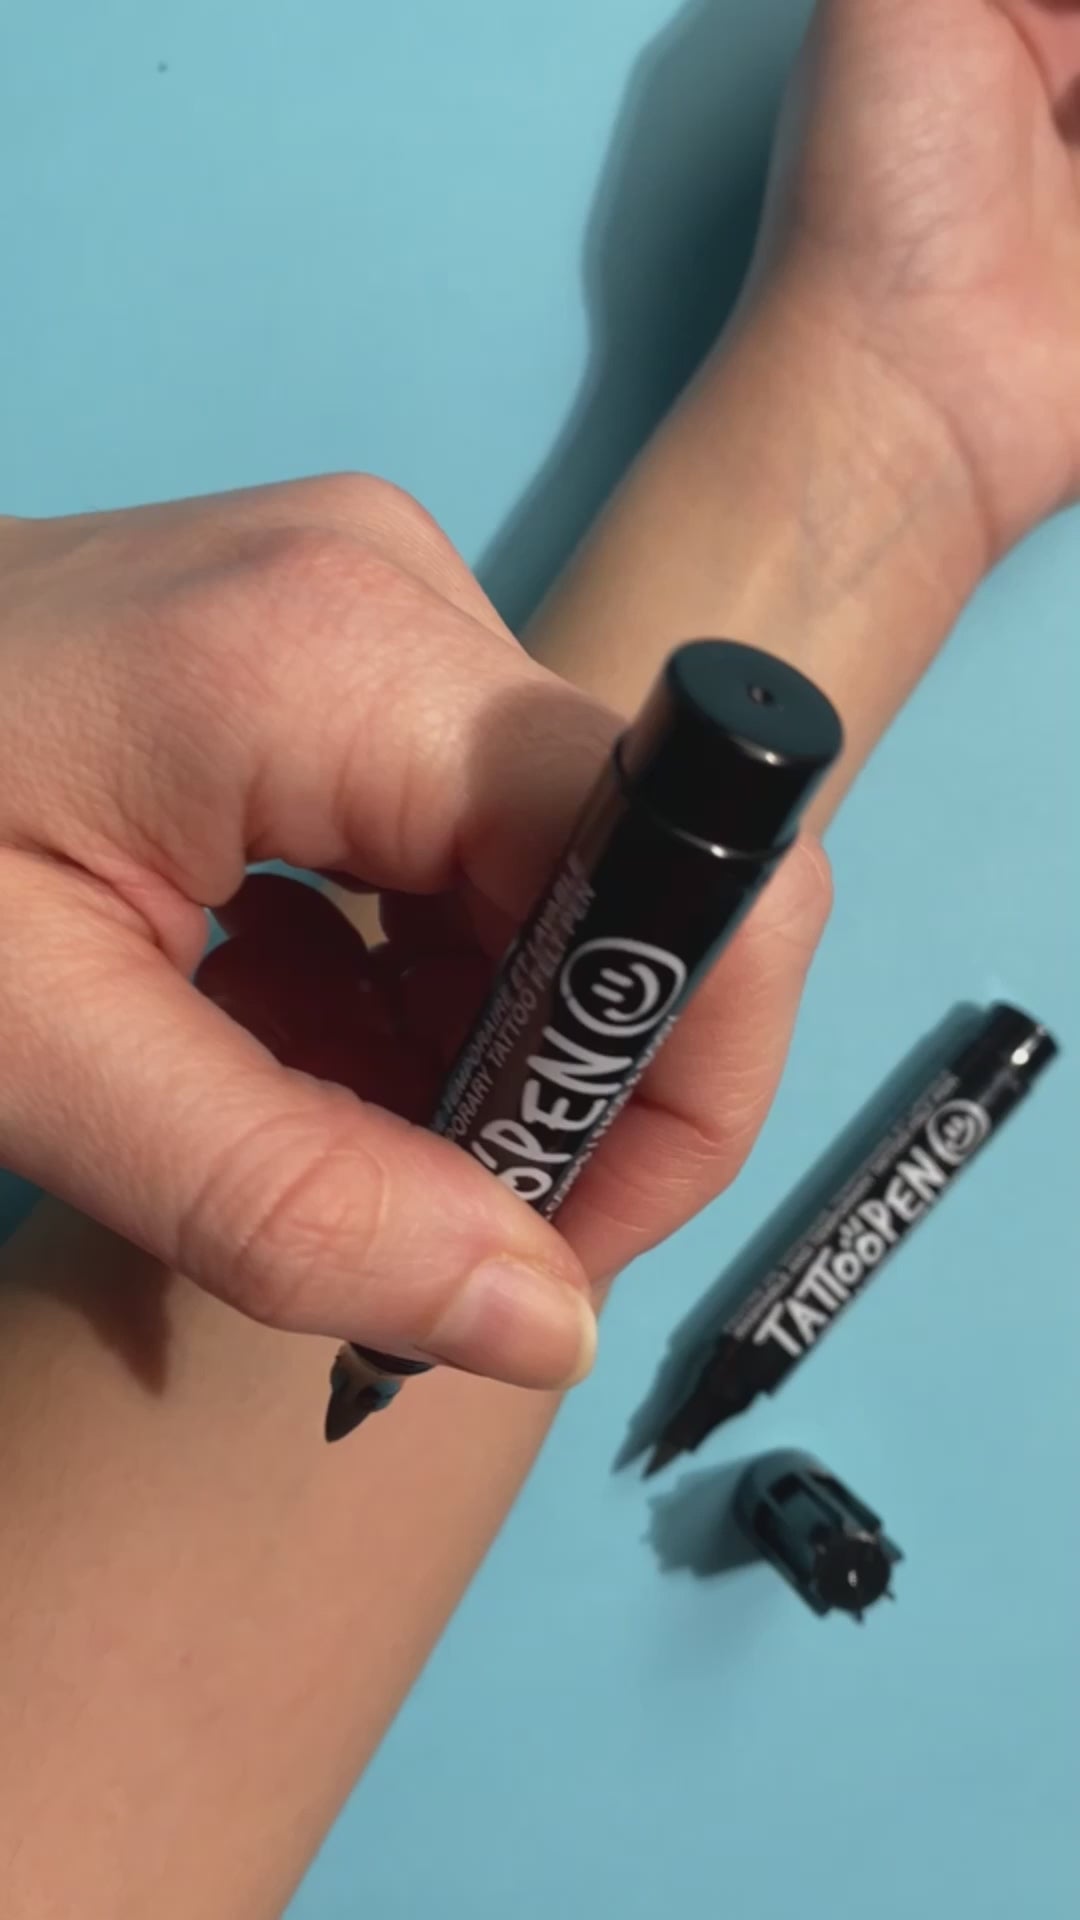 Your skin shouts Helau Cool looks with the KREUL Tattoo Pen